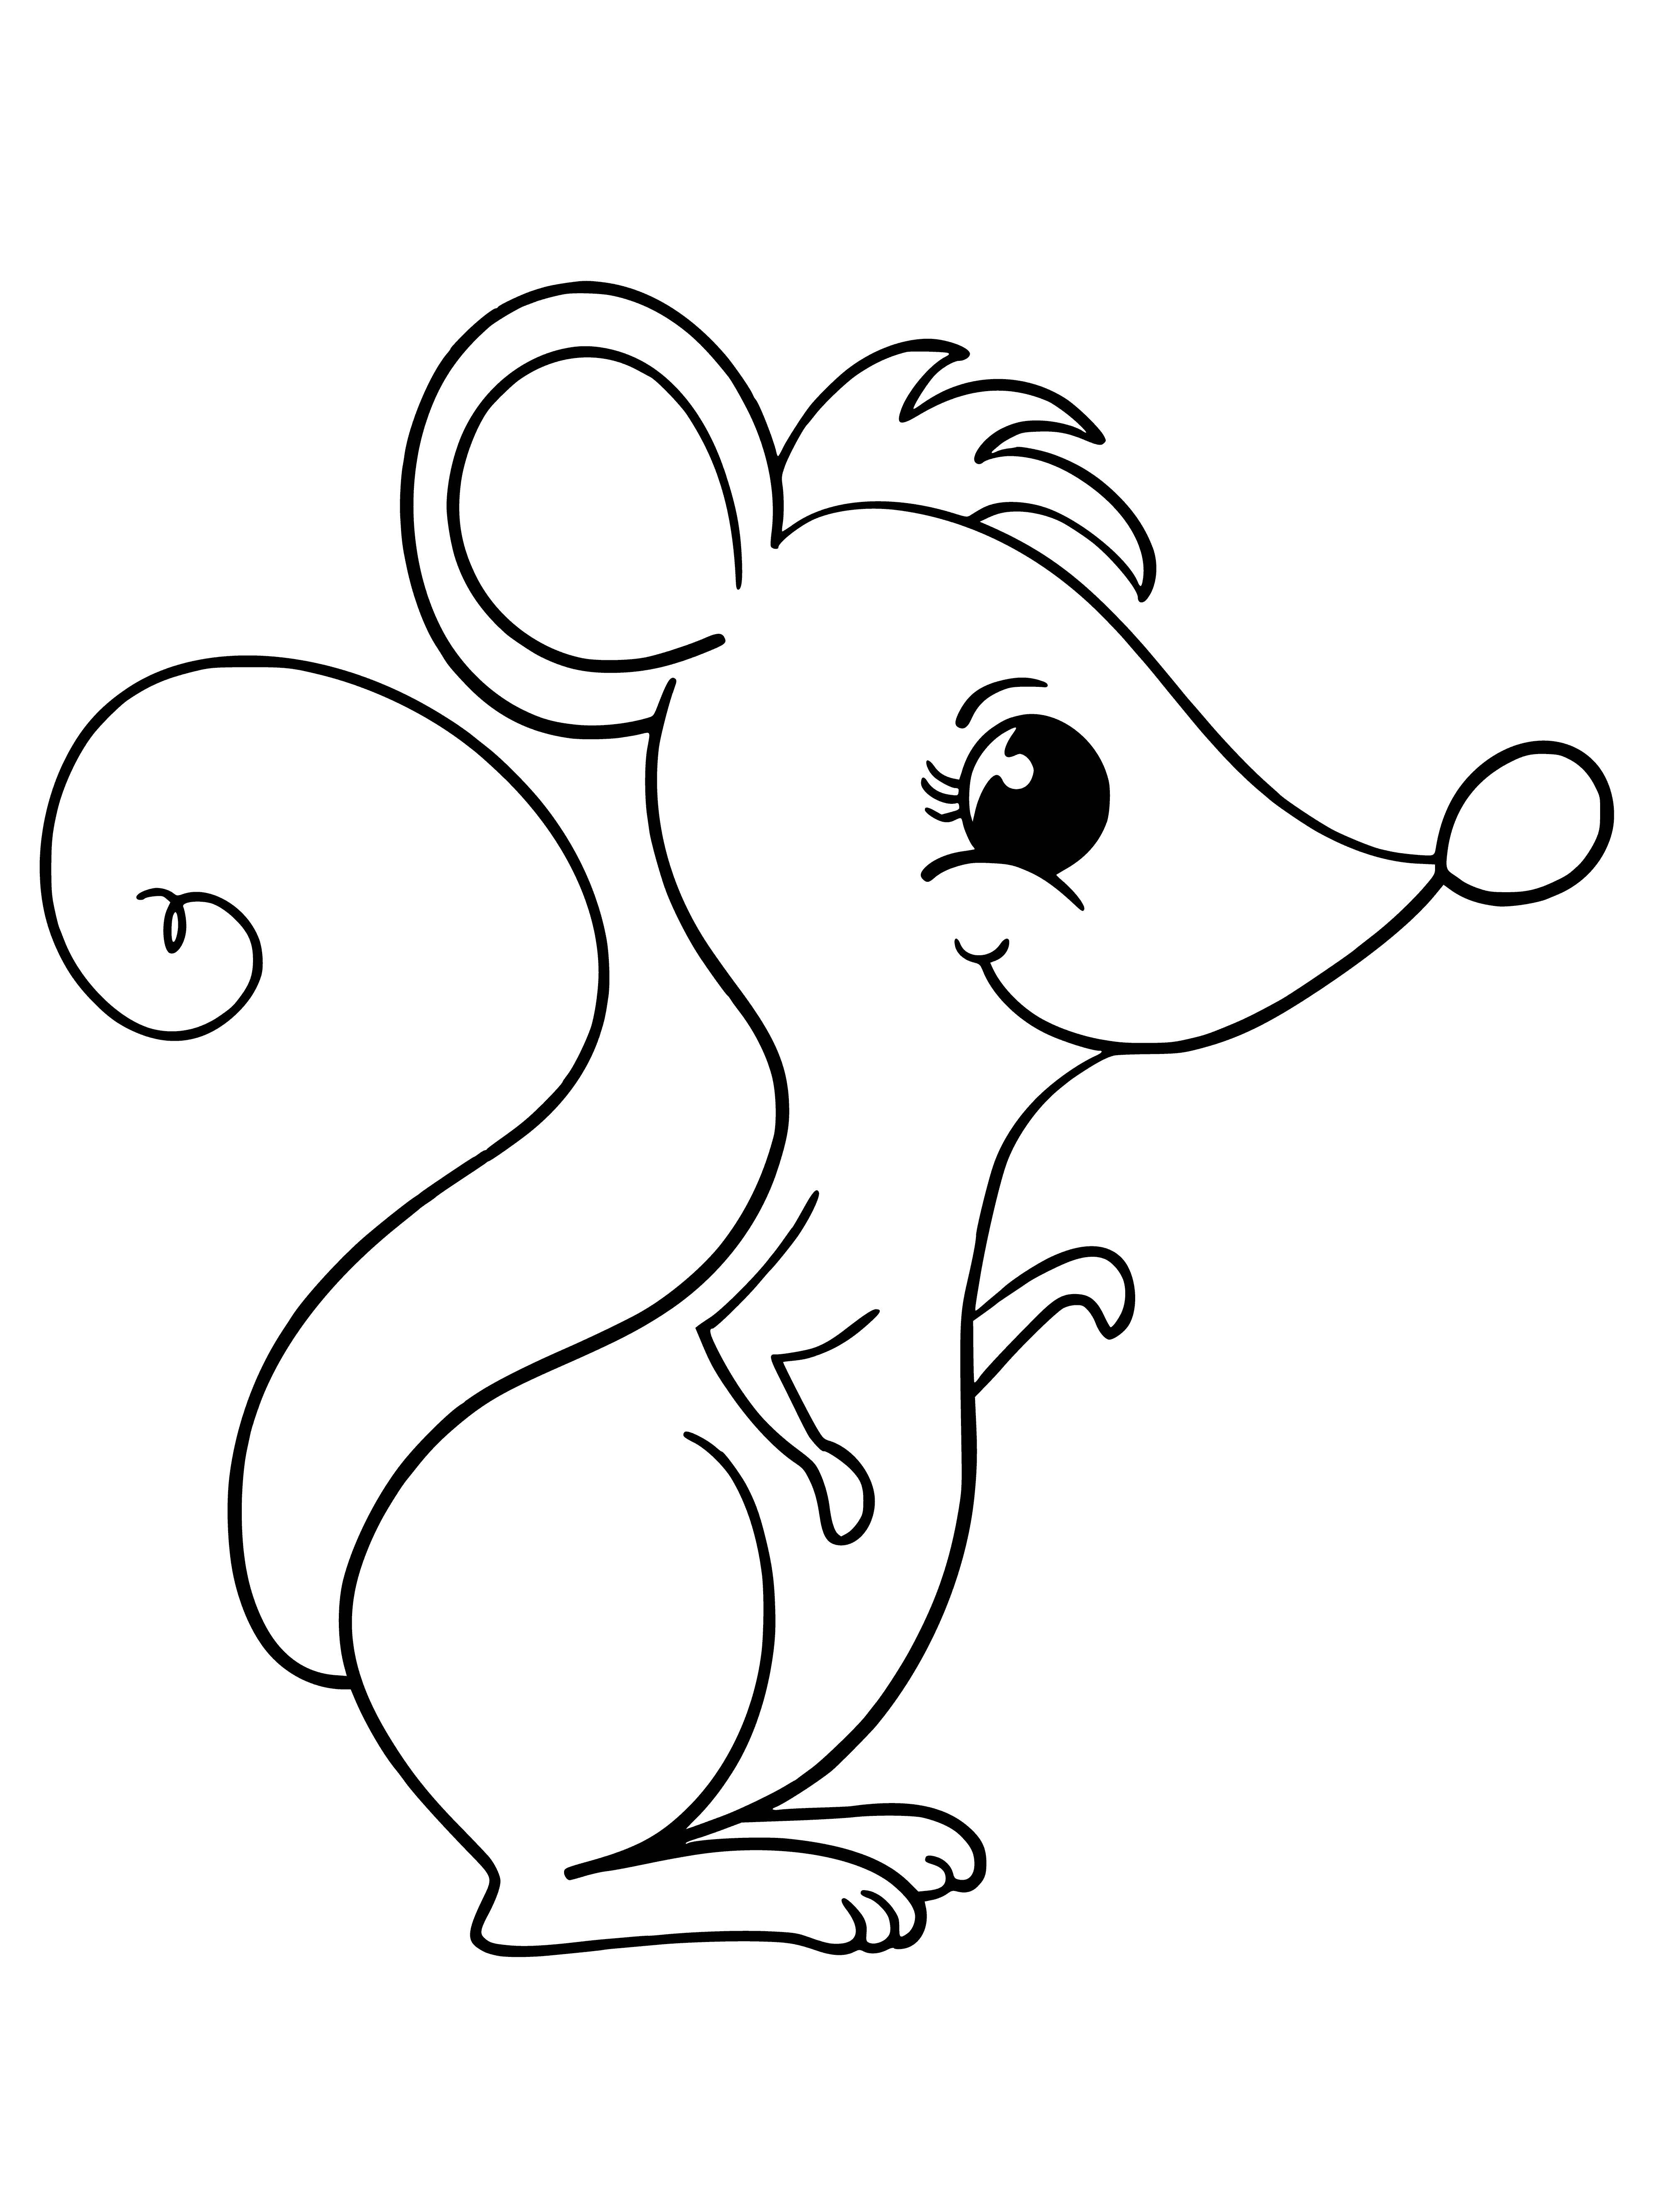 Rat is a cute, funny-looking mouse w/ big ears, long tail, & brown/white fur.